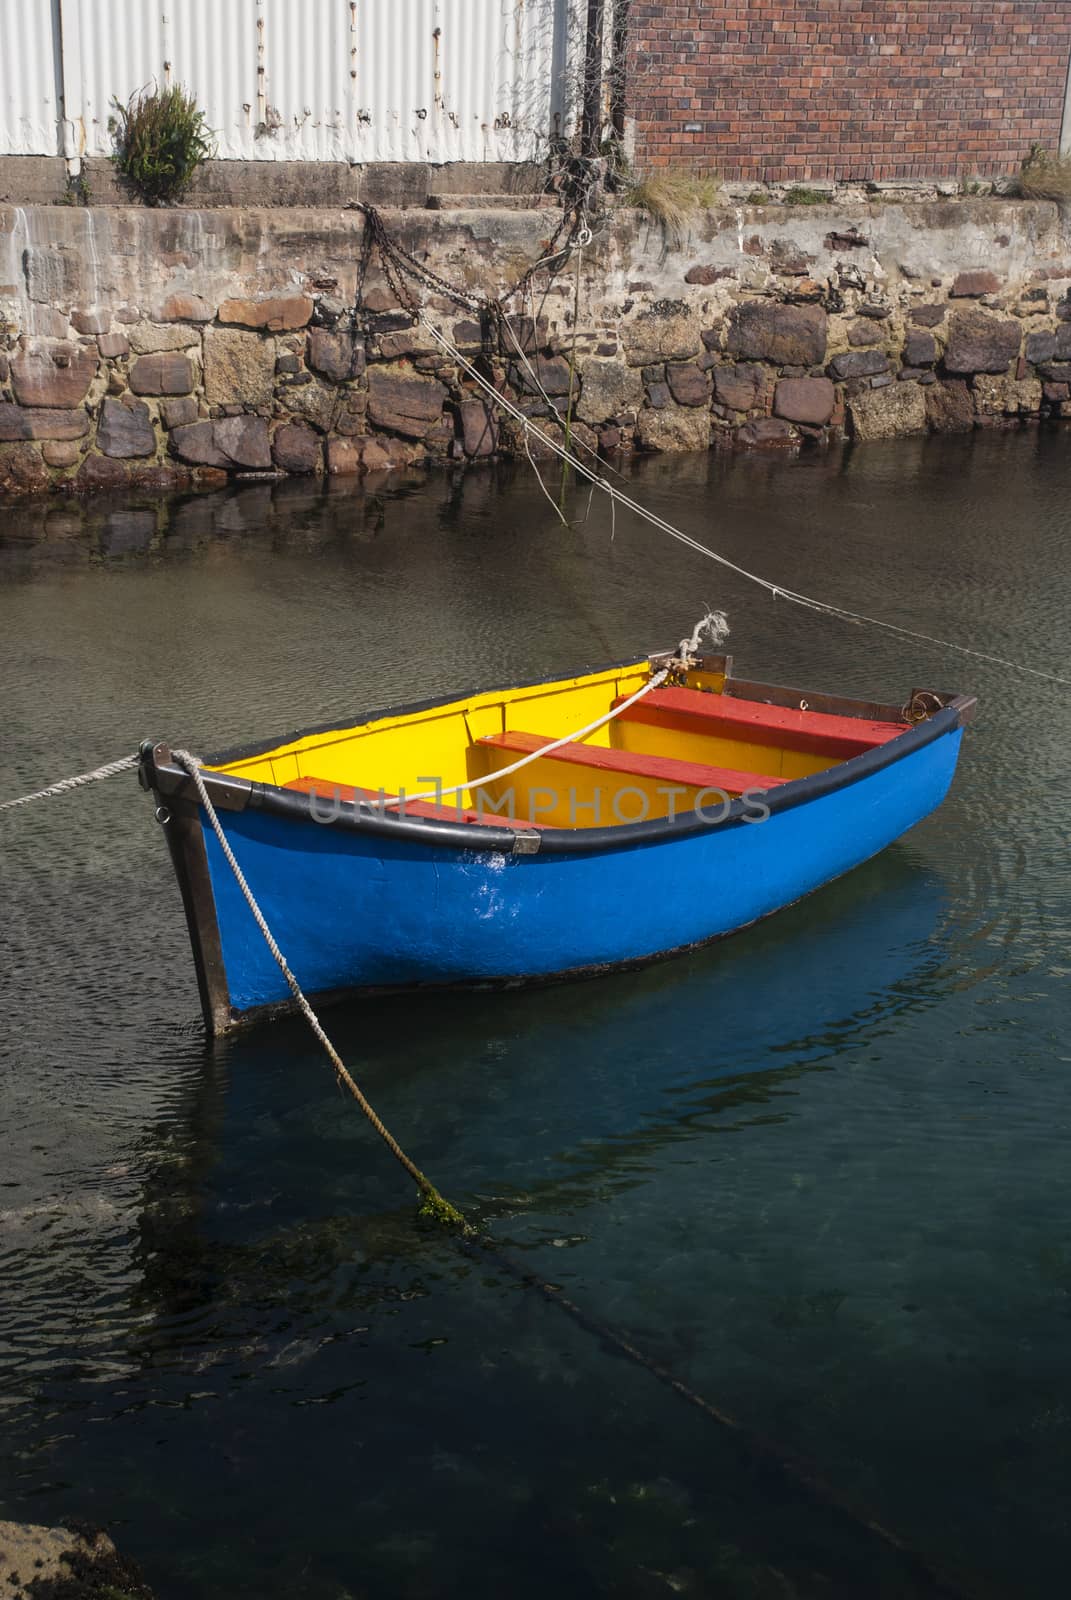 A colourful rowboat in False Bay, South Africa